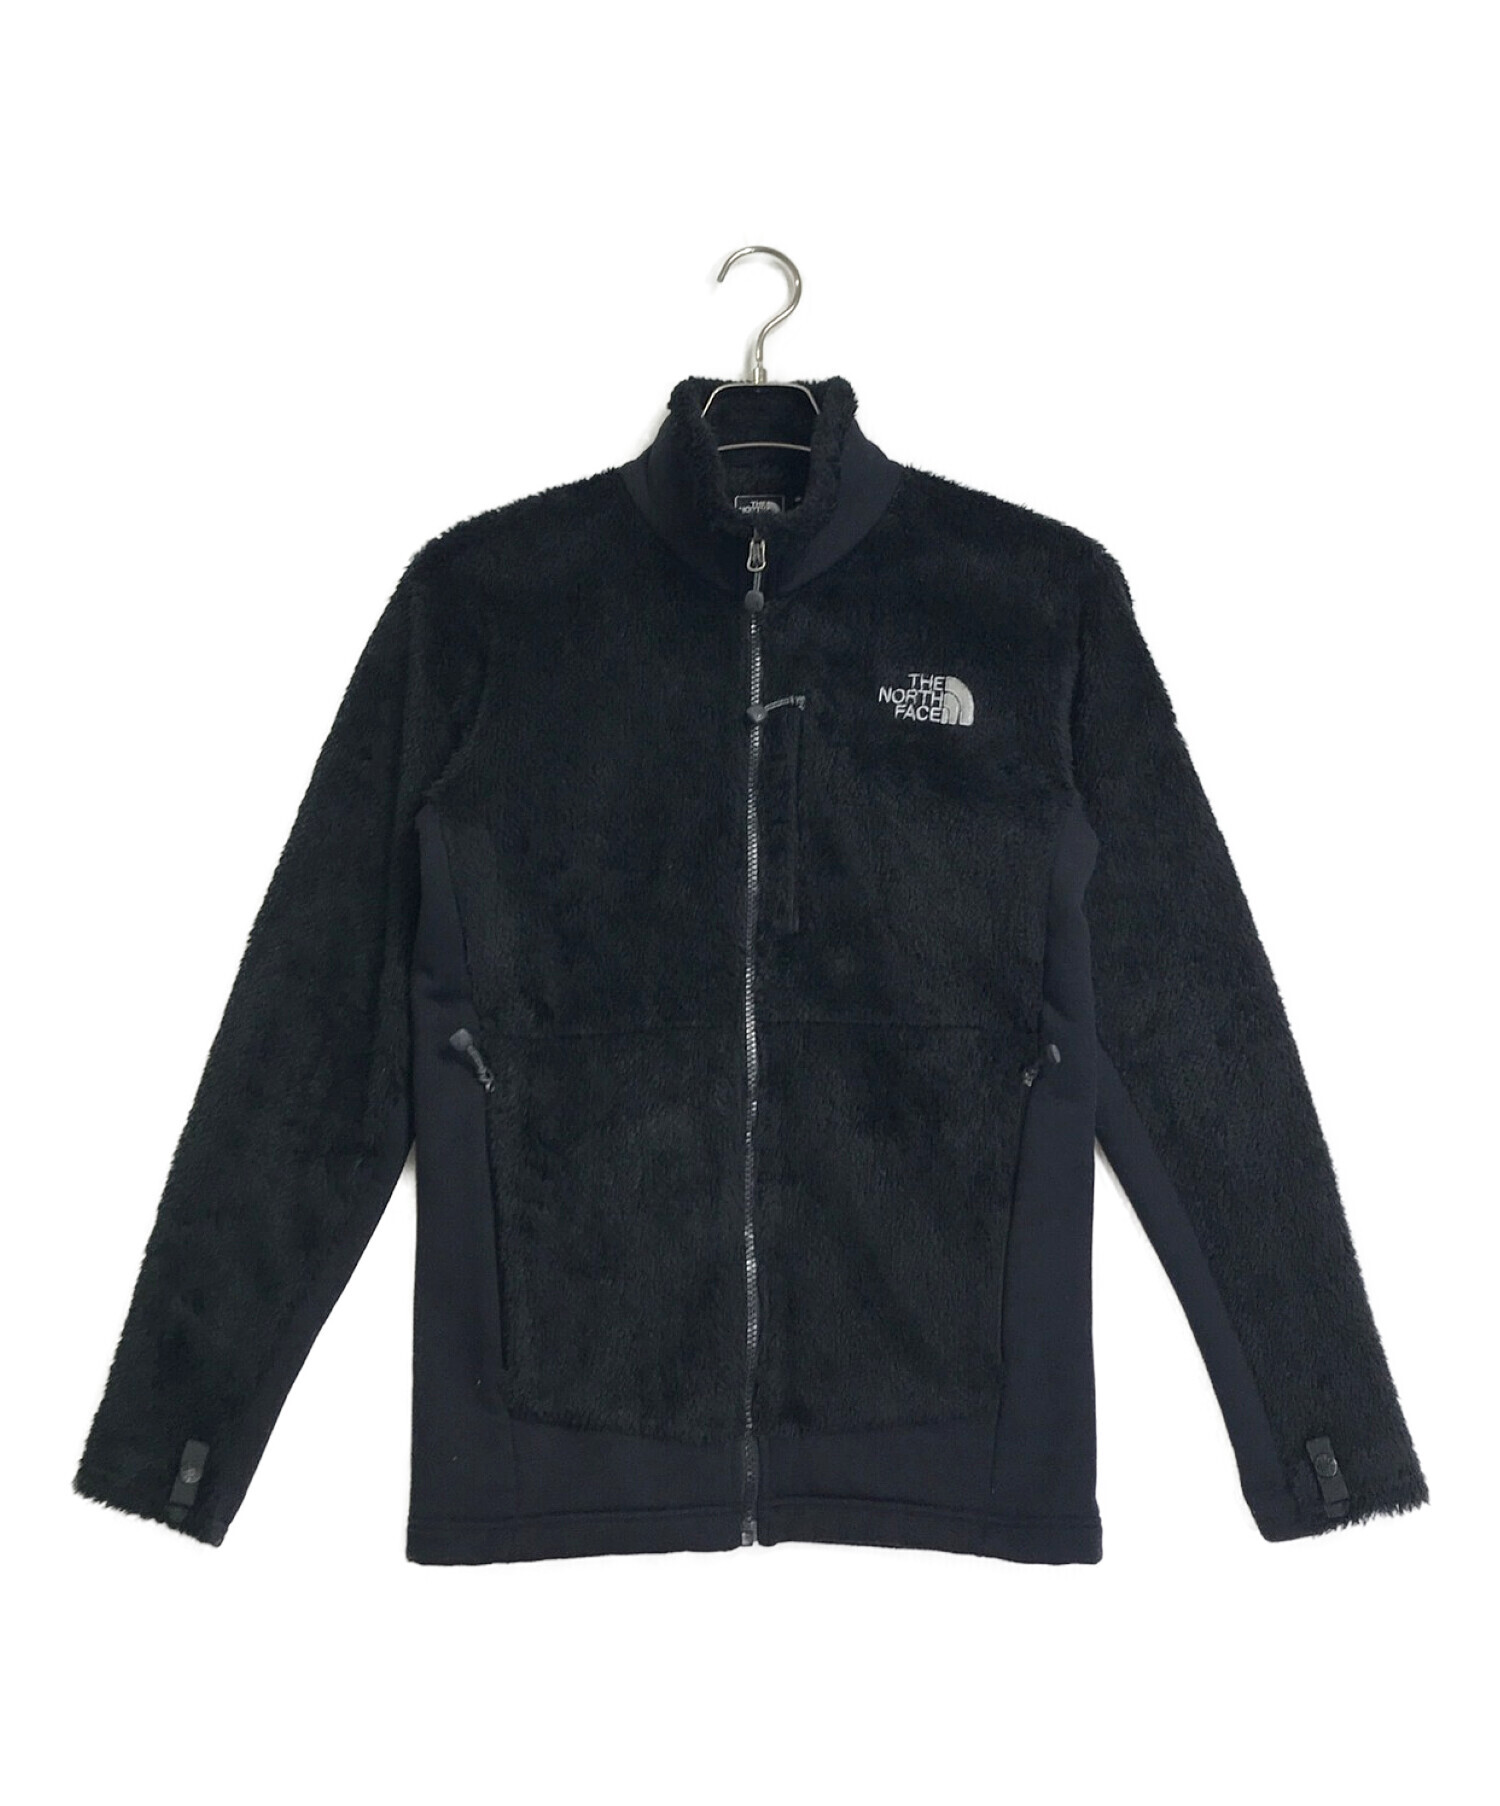 THE NORTH FACE VERSA AIR ZIP IN JACKET S